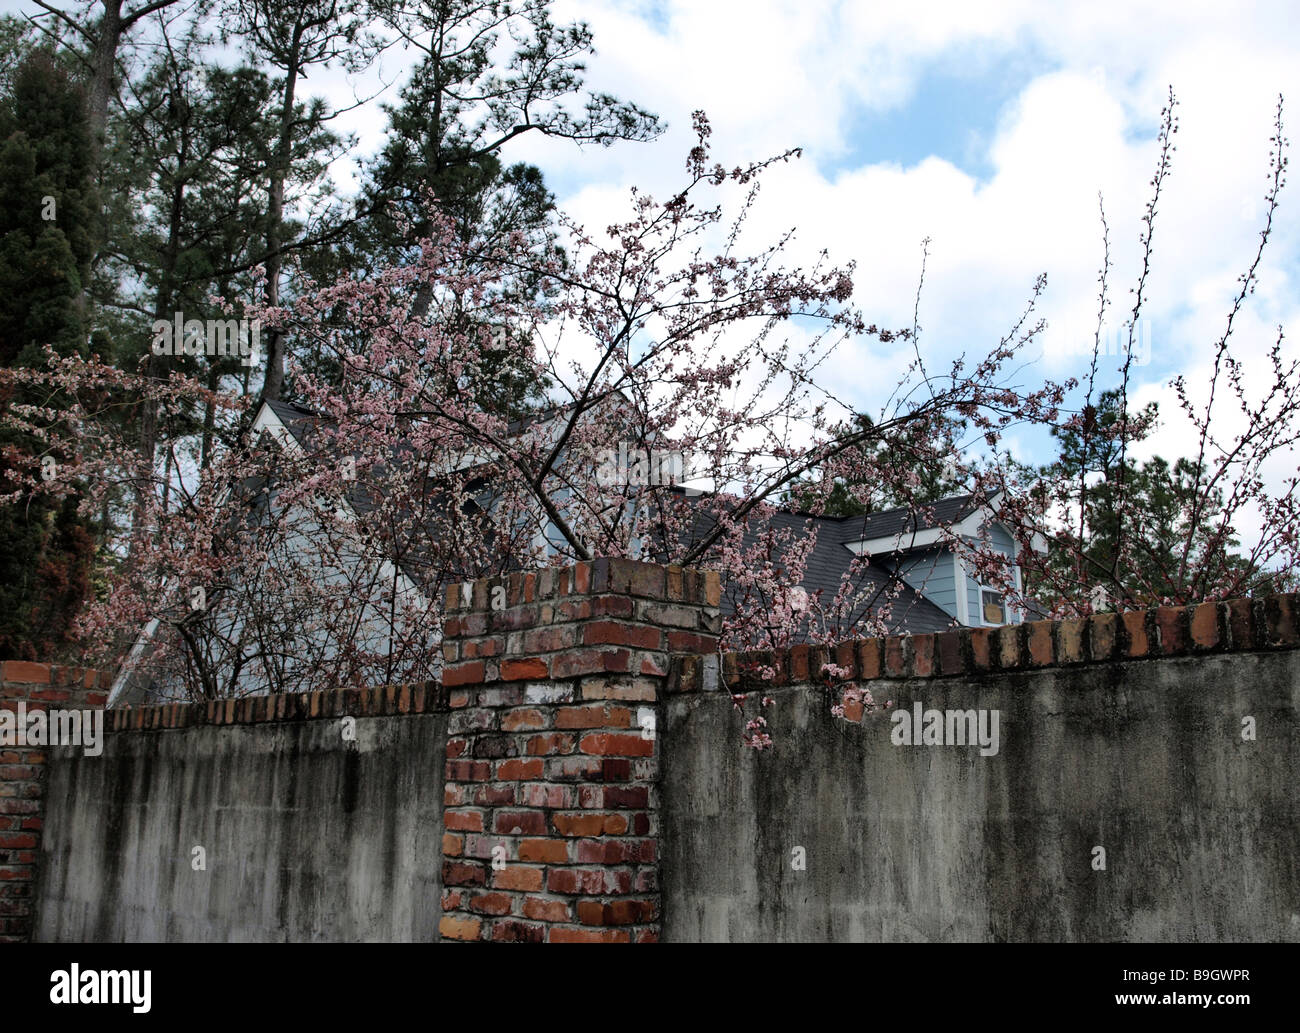 garden wall with pink flowers trees blue sky and clouds patterns on cement fence Stock Photo